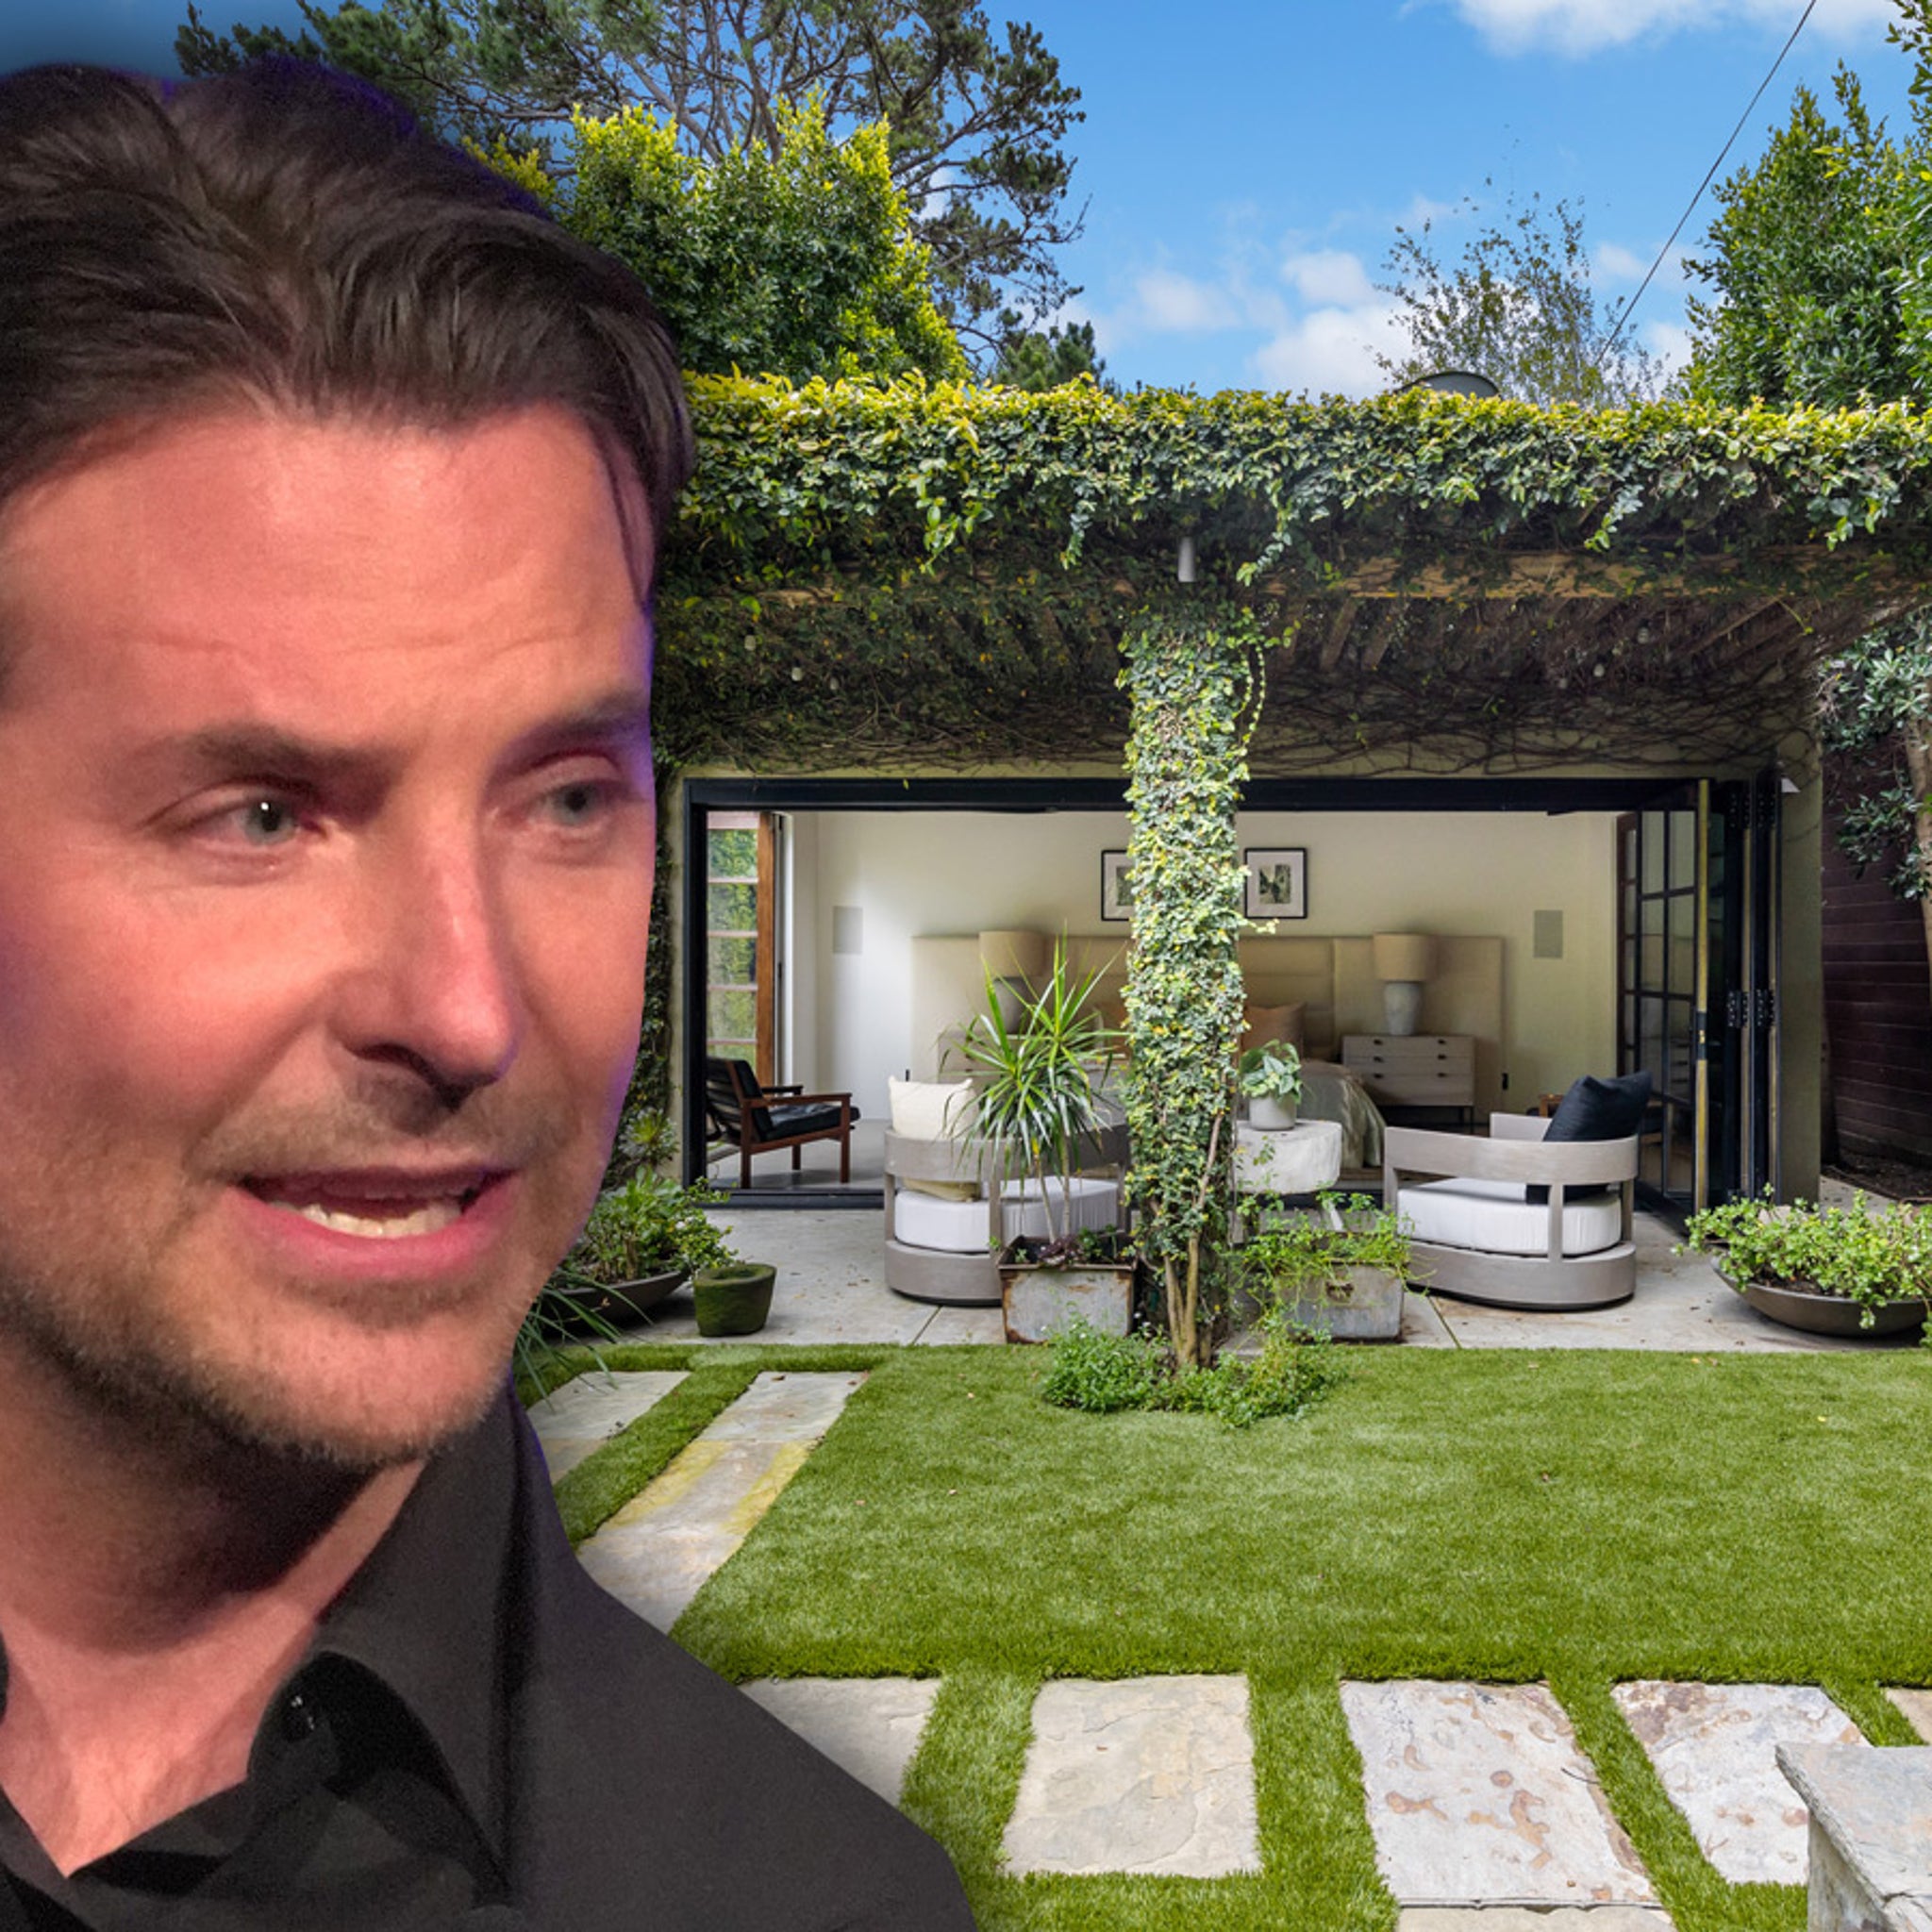 Actor Bradley Cooper's First Home Is On the Market for $2.4M